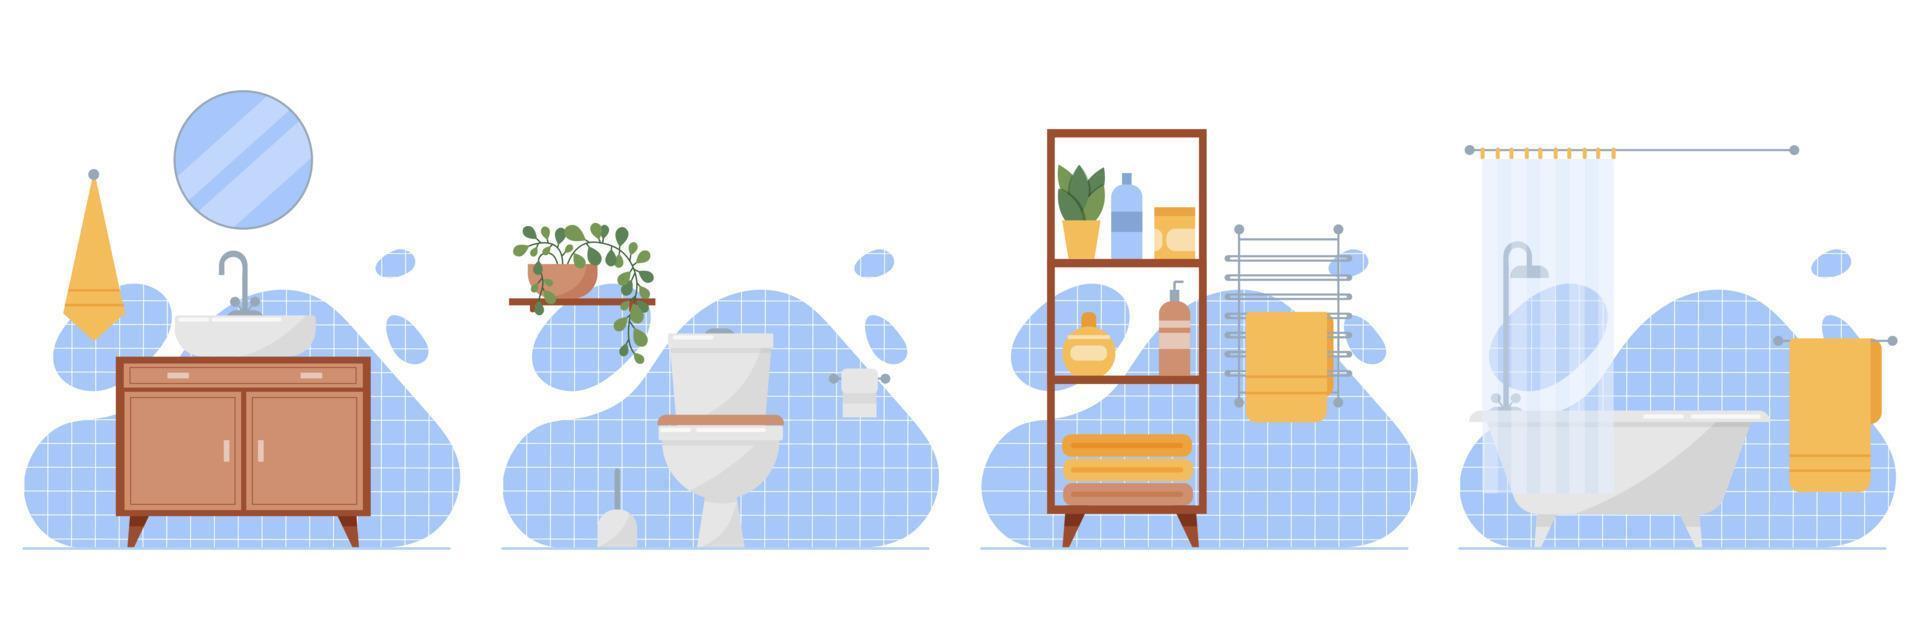 Bathroom and toilet interior design with furniture and bathroom items - cabinet with sink, mirror, towel holder, toilet bowl, bathroom shelf with bottles, bath with screen, blue wall tiles. vector